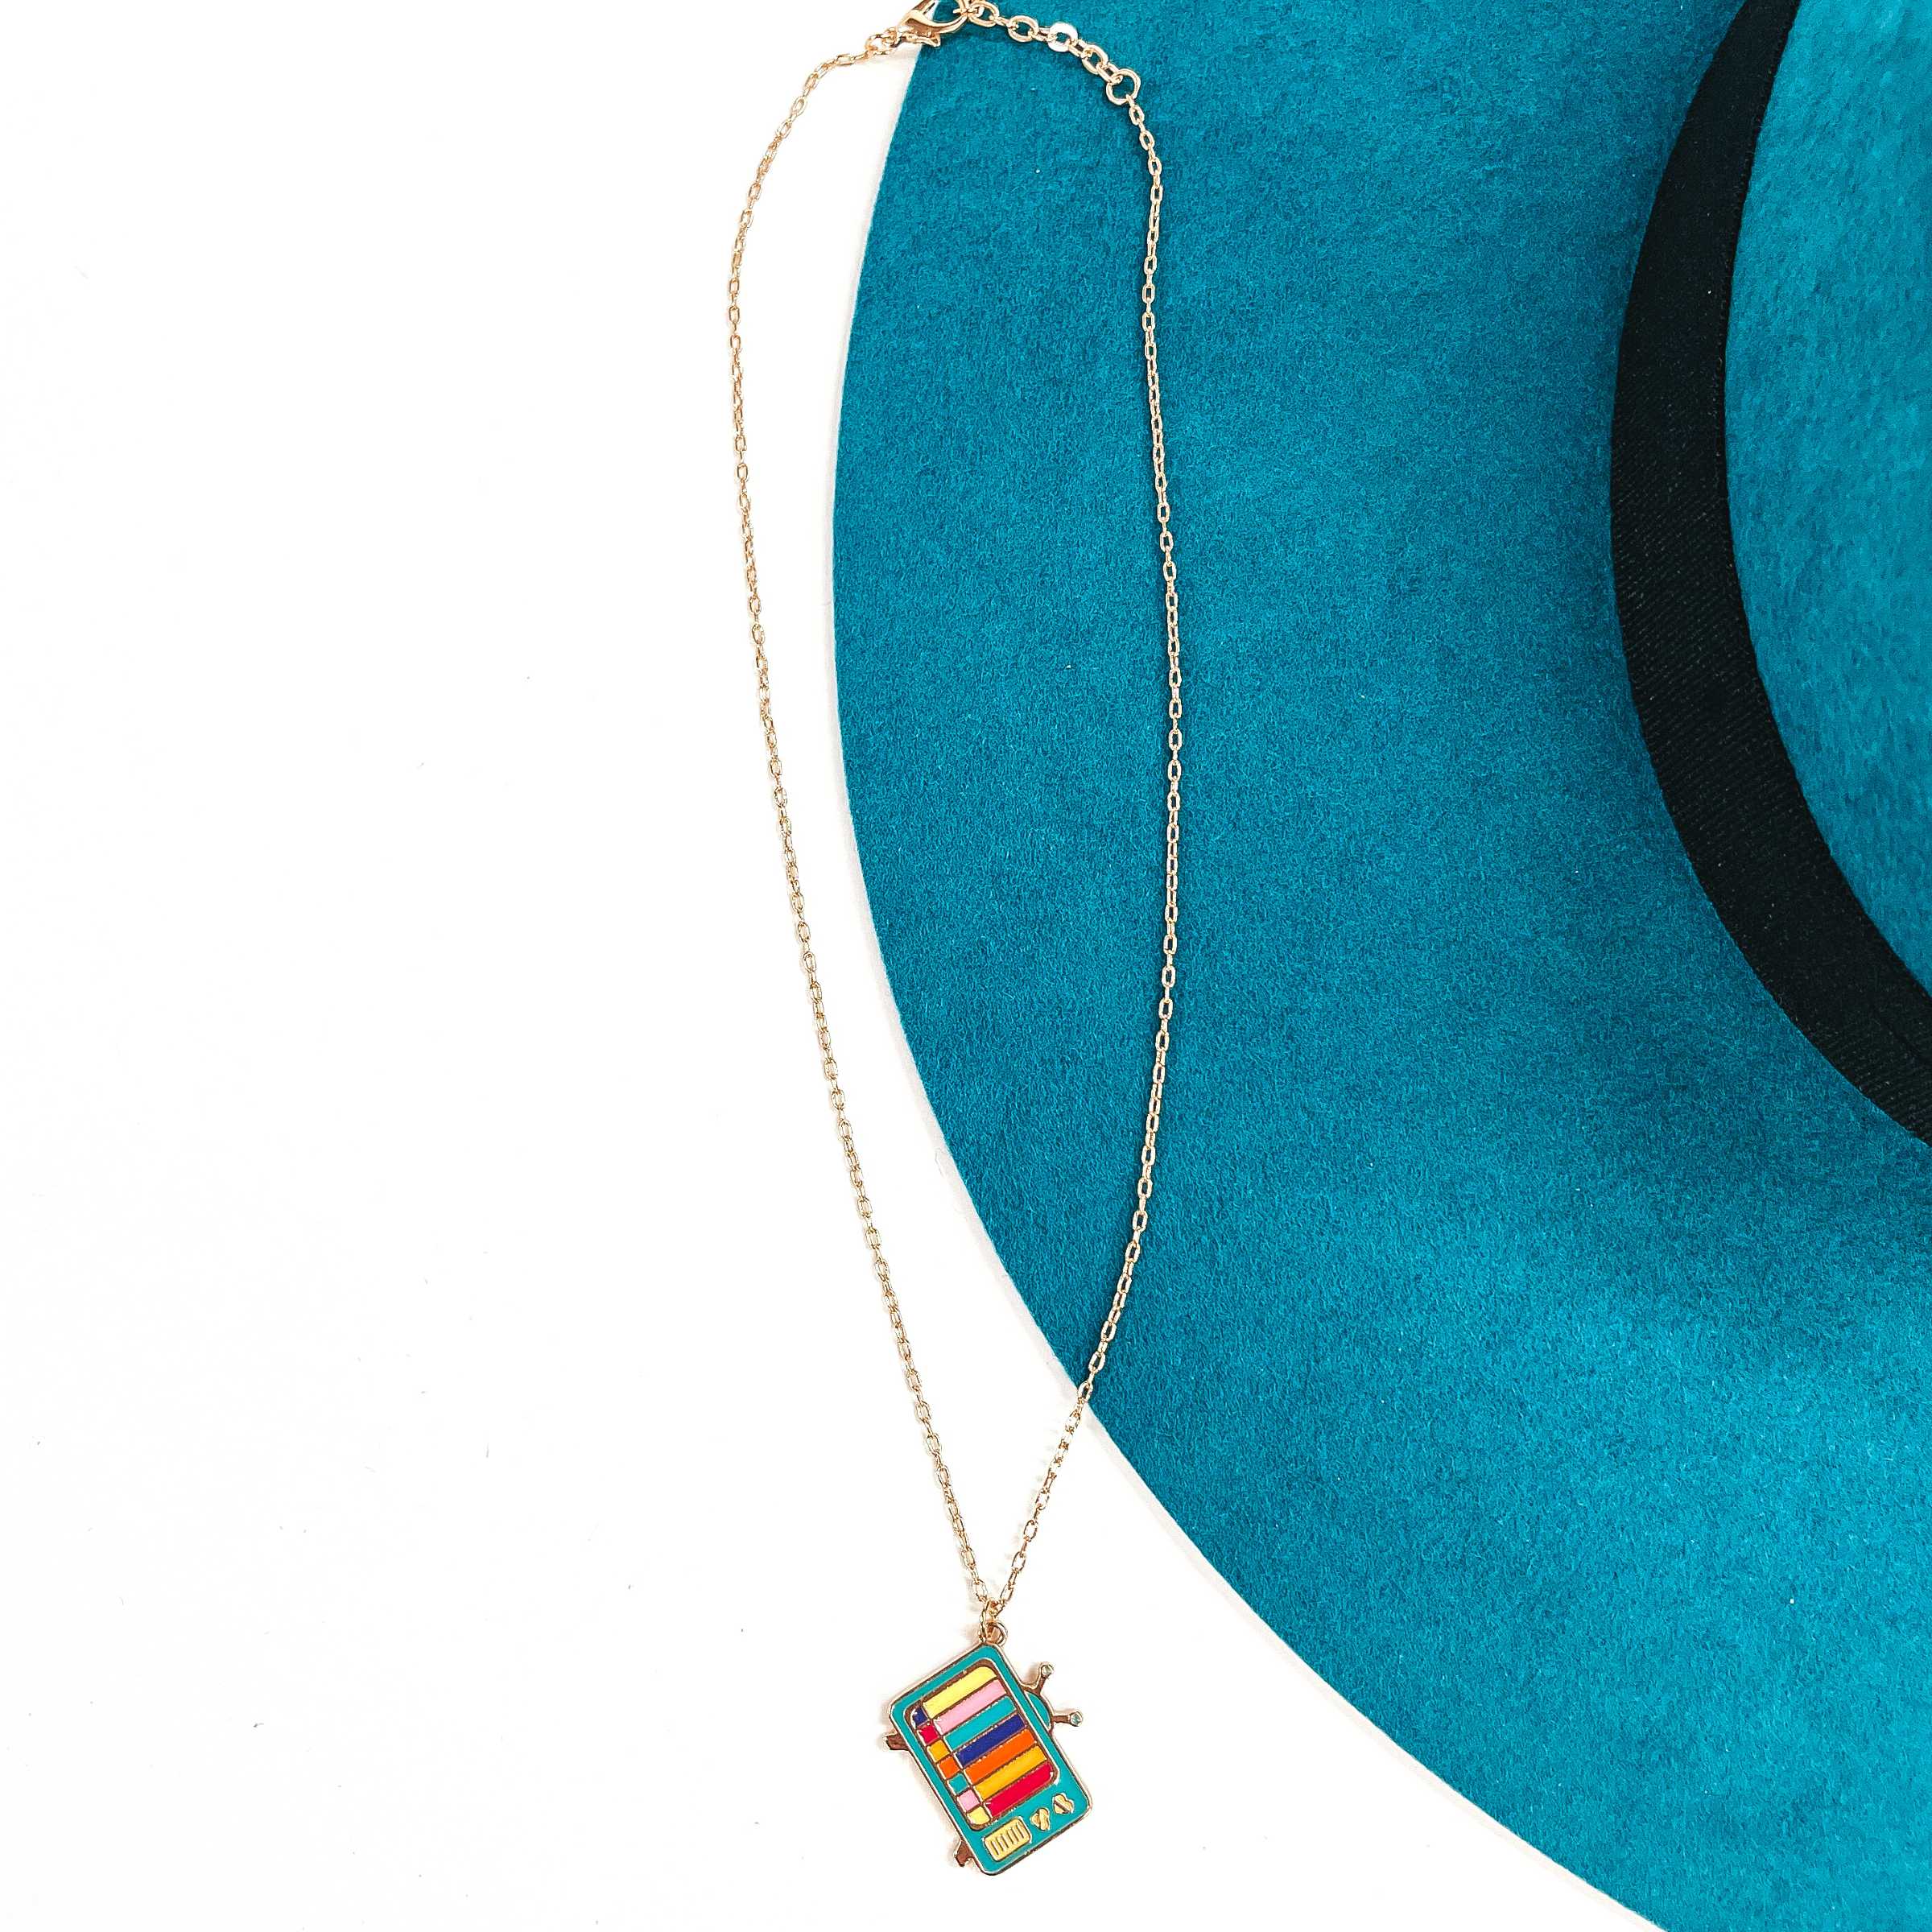 Retro Movie Nights Gold Tone Necklace with Television Pendant in Teal Mix - Giddy Up Glamour Boutique